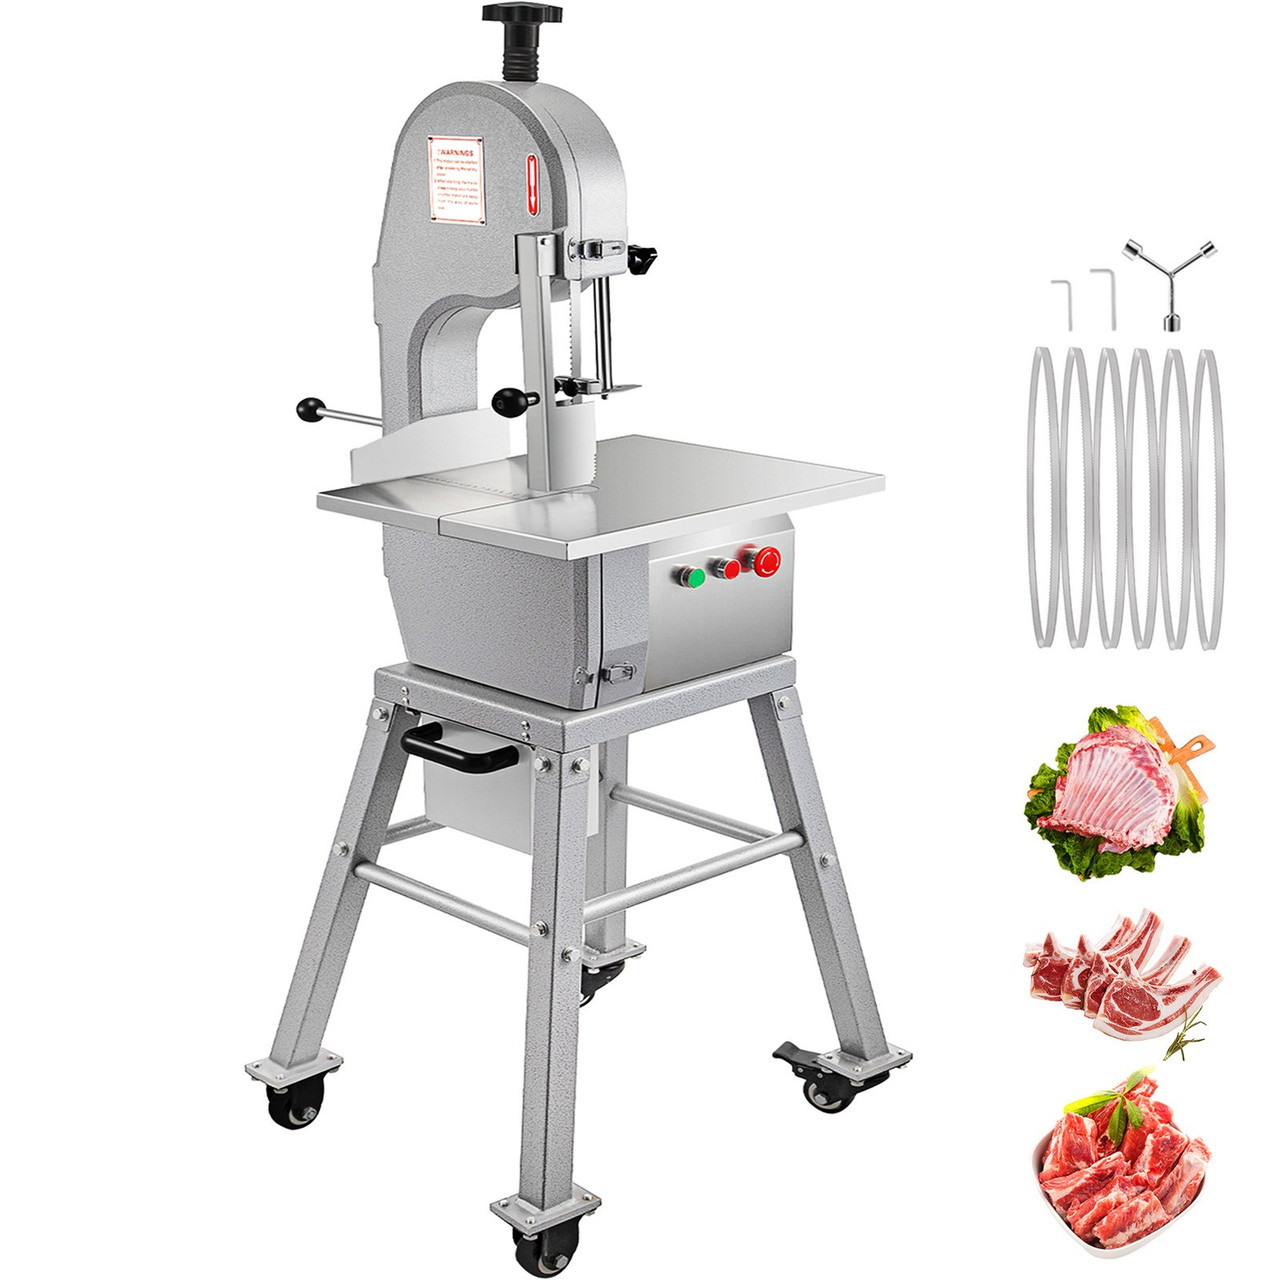 110V Bone Saw Machine 850W Frozen Meat Cutter 1.16HP Butcher Bandsaw Thickness Range 4-180mm Max Cutting Height 220mm Work Table 18.3x14.4inch Sawing Speed 19m/s with 6 Saw Blades & Mobile Base